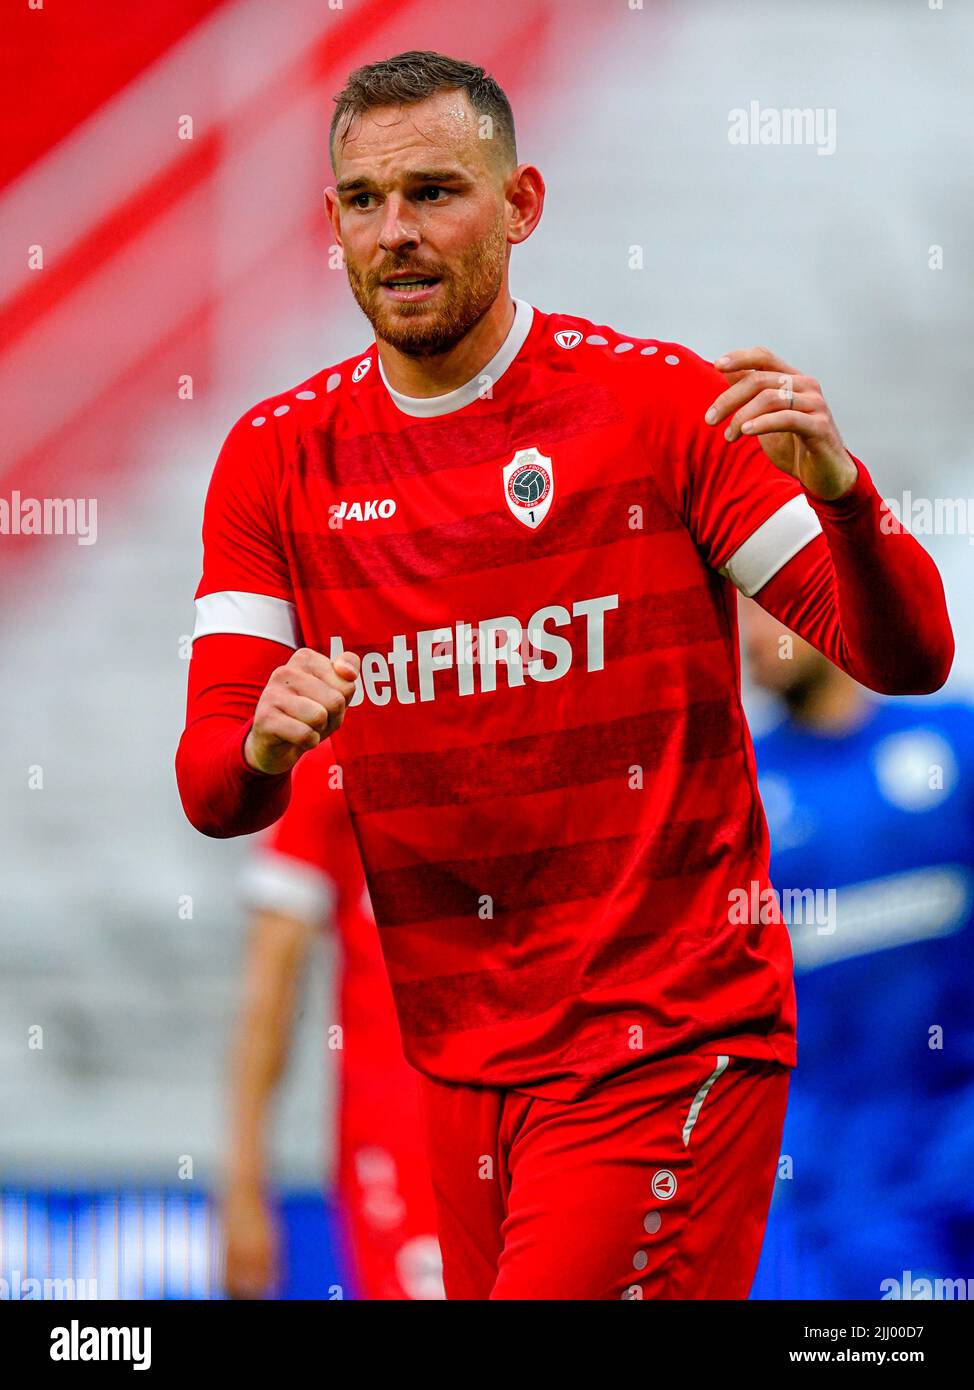 ANTWERP, BELGIUM - JULY 21: Vincent Janssen of Royal Antwerp FC during the  UEFA Europa Conference League - Qualification match between Royal Antwerp  FC and KF Drita at Bosuilstadion on July 21,